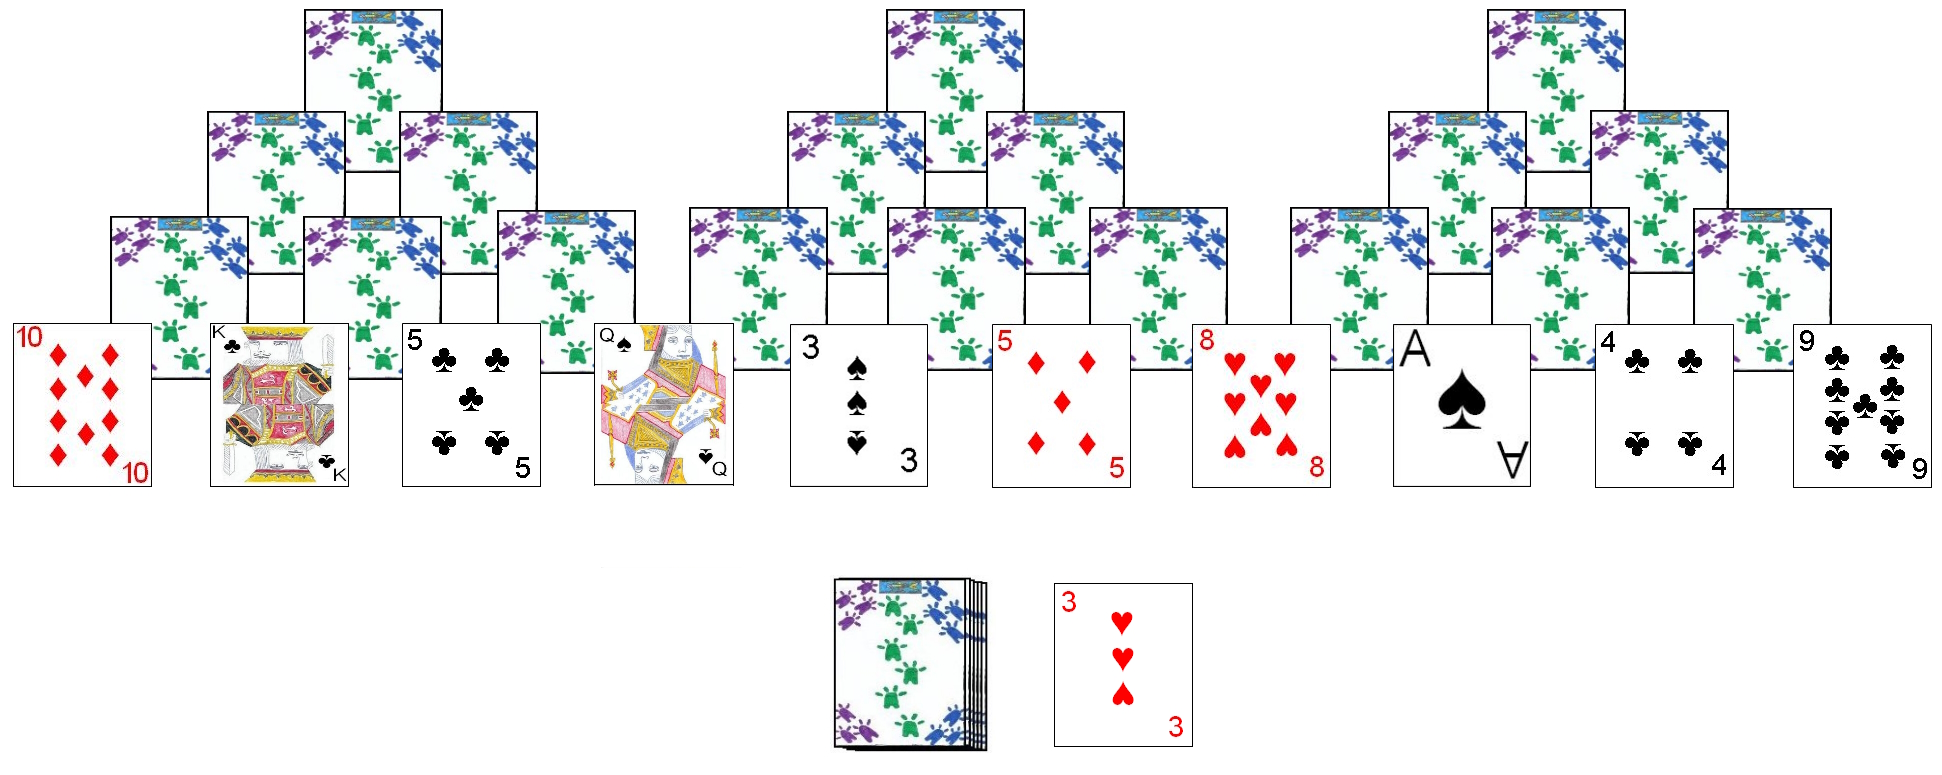 Tri-Peaks Solitaire Rules and Tips. Play Tri-Peaks Pyramid solitaire online